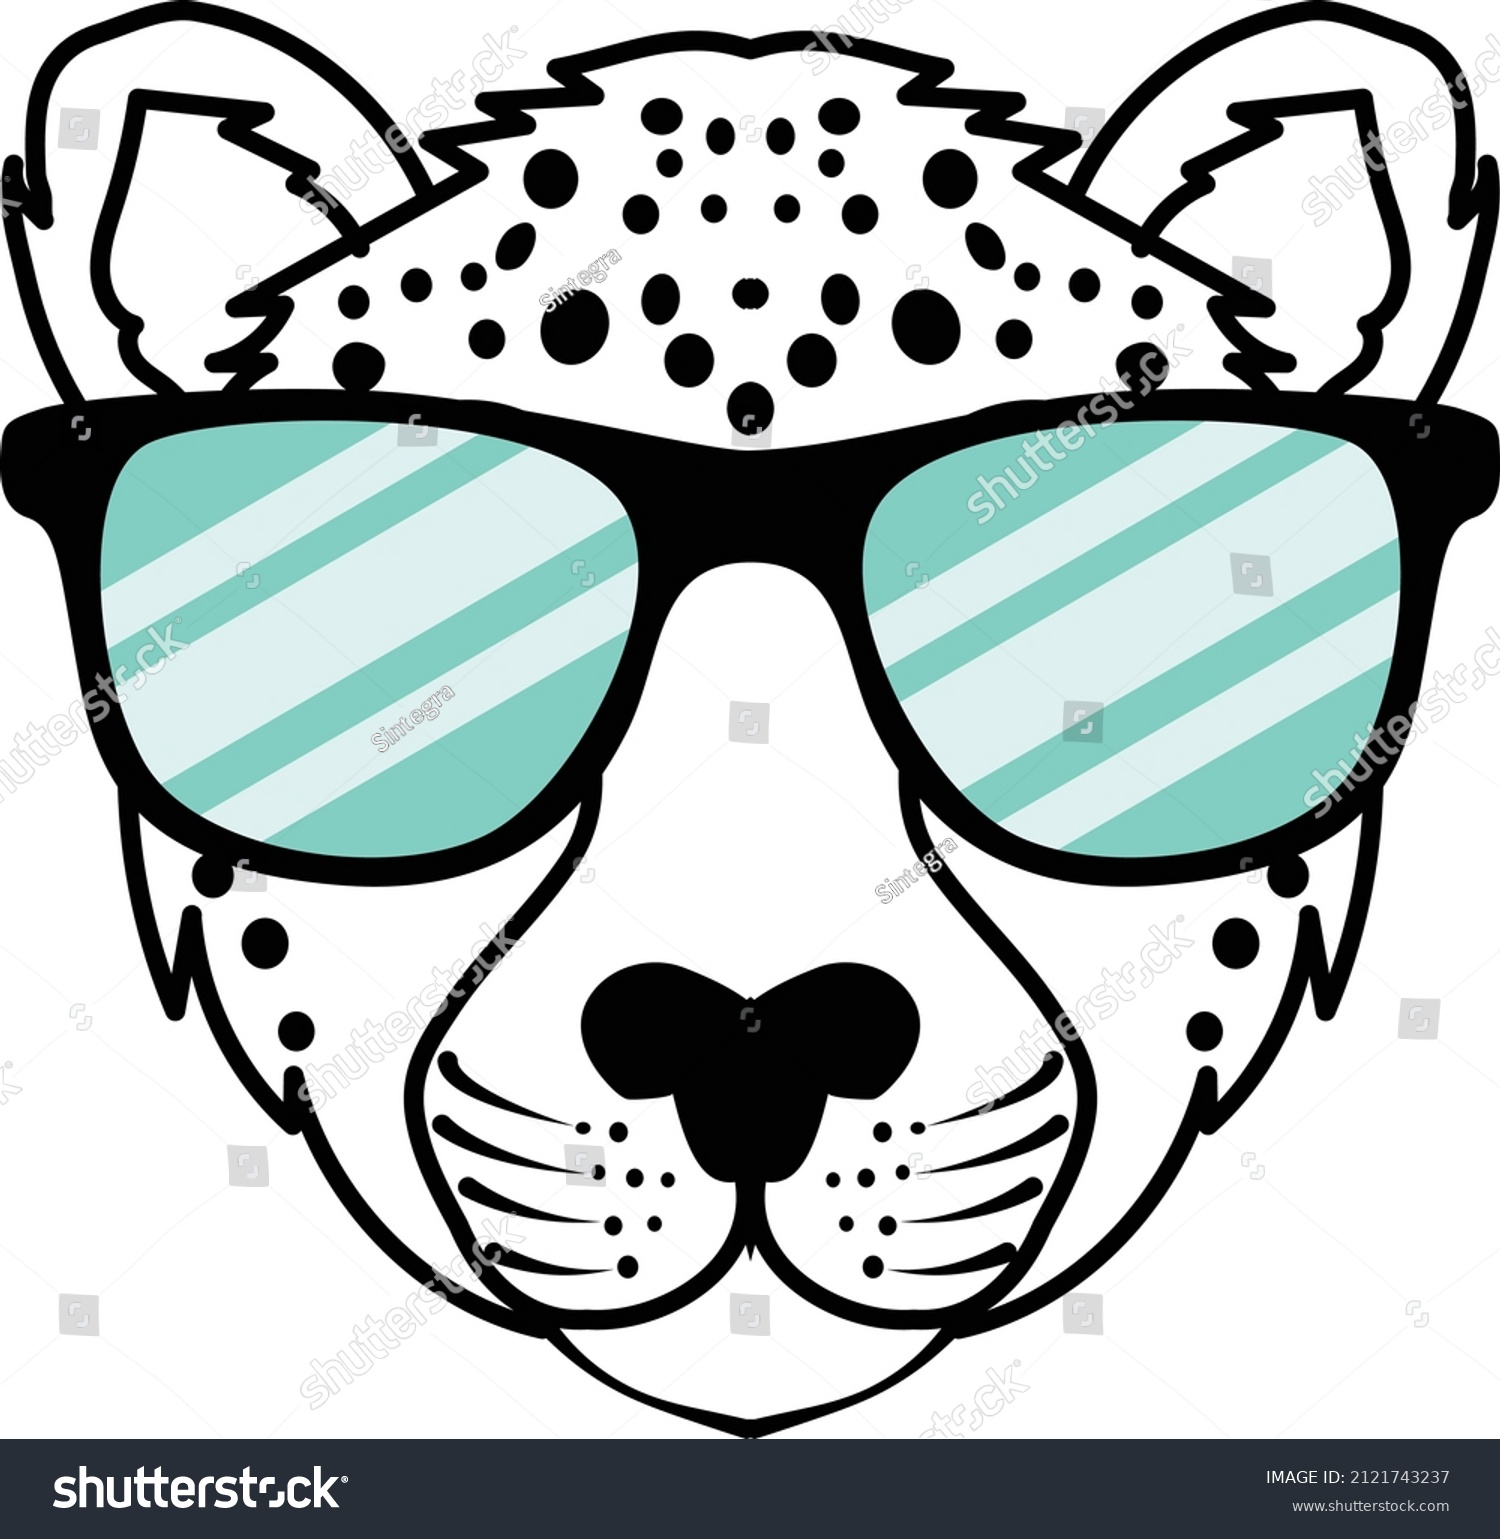 SVG of  Cheetah With Sunglasses SVG File is suitable for t-shirt, laser cutting, sublimation, hobby, cards, invitations, website or crafts projects. Perfect for magazine, news papers, posters, headers etc. svg